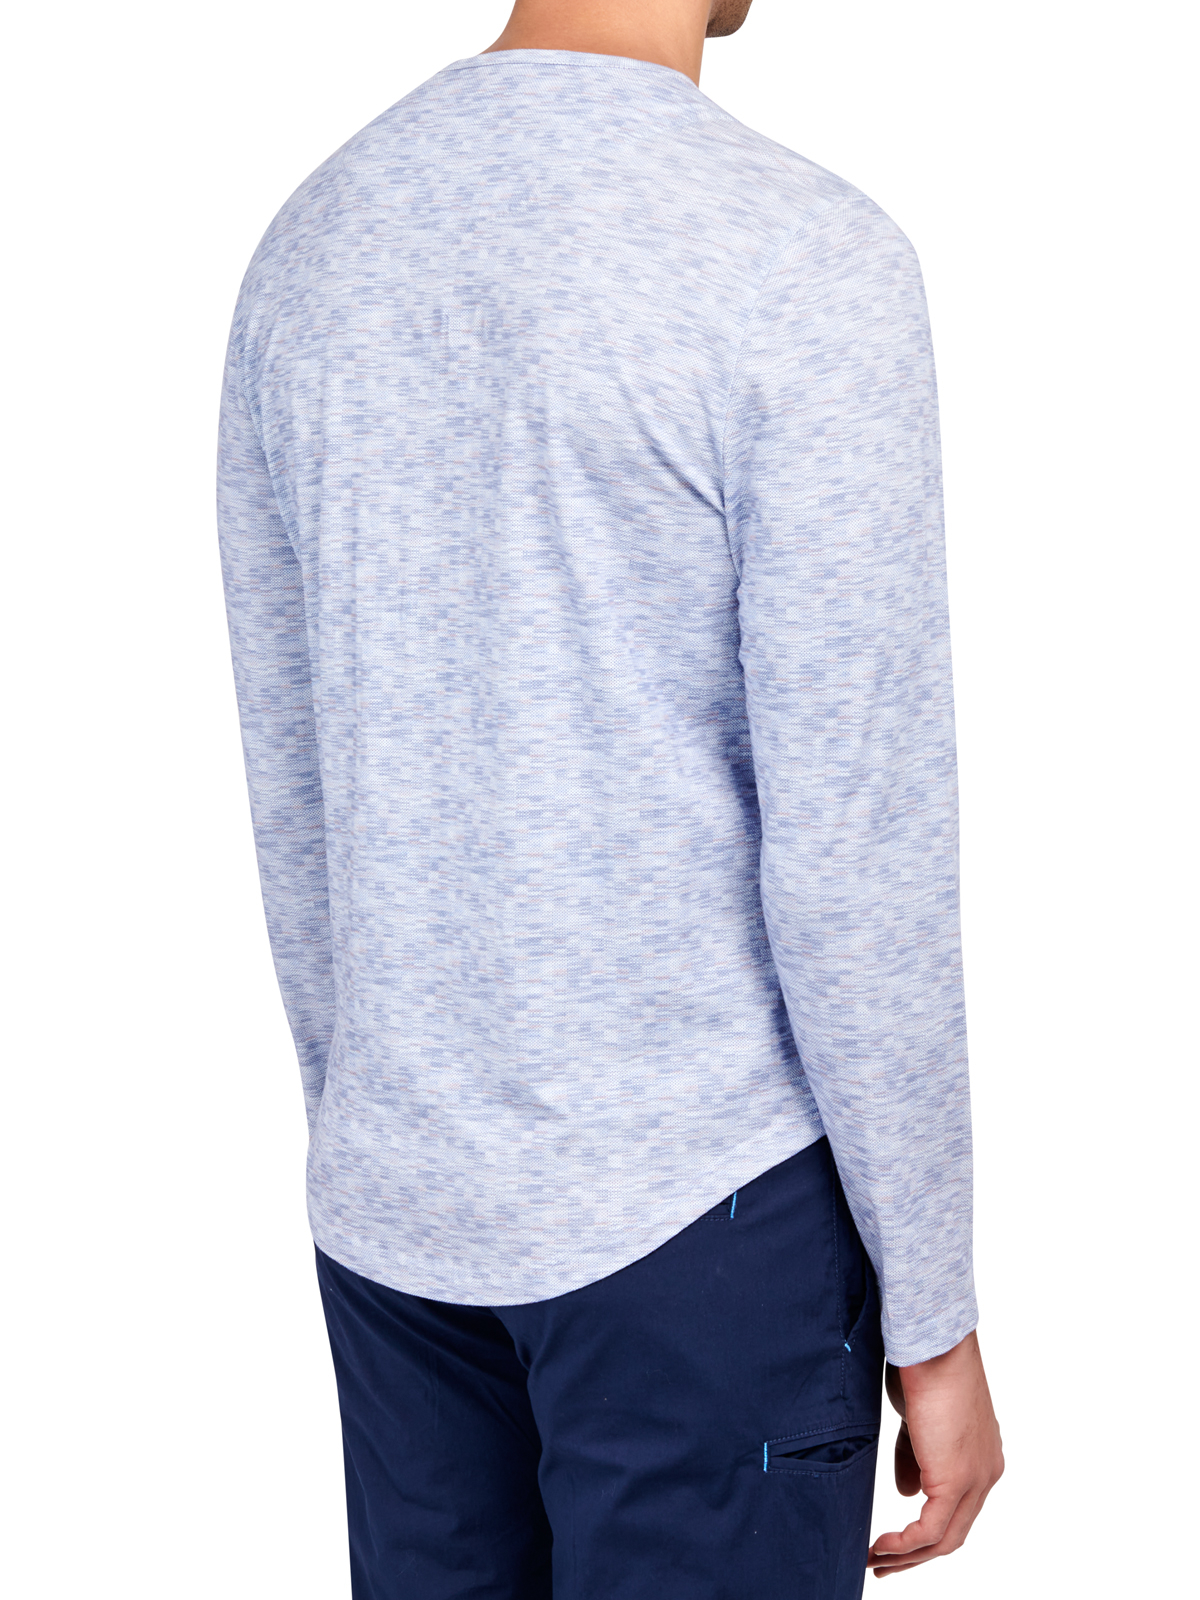 ABSTRACT TEXTURE LONG SLEEVE HENLEY